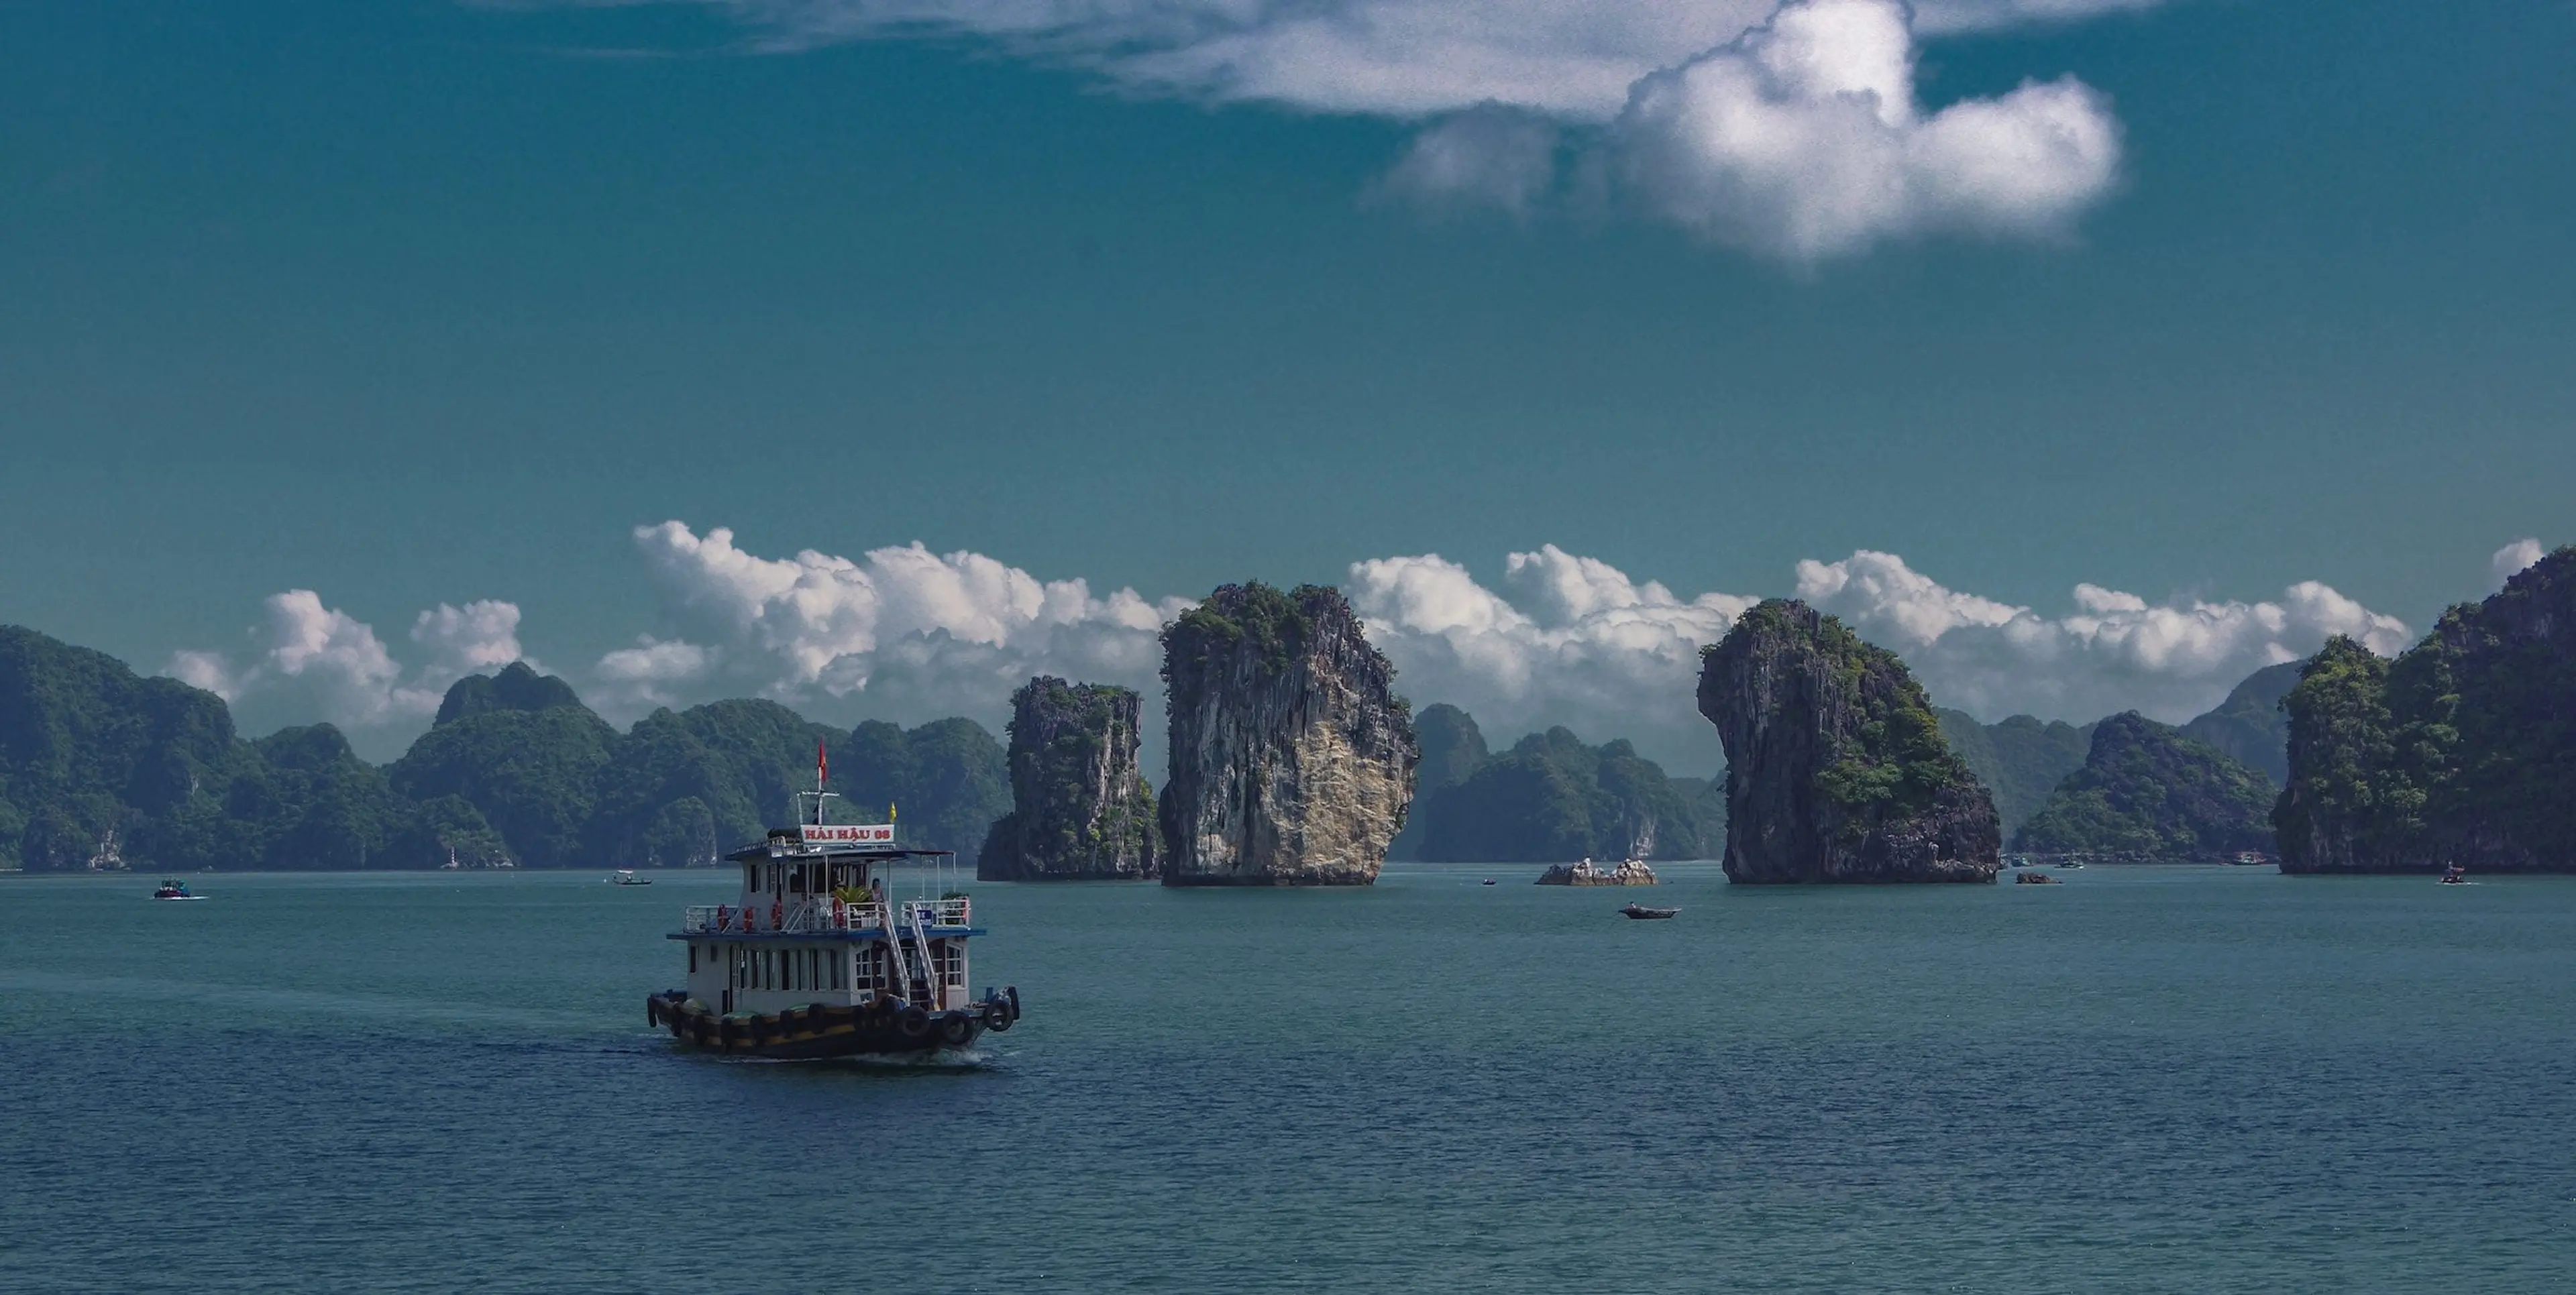 Ha Long Bay - The most famous stop in Vietnam for travelers